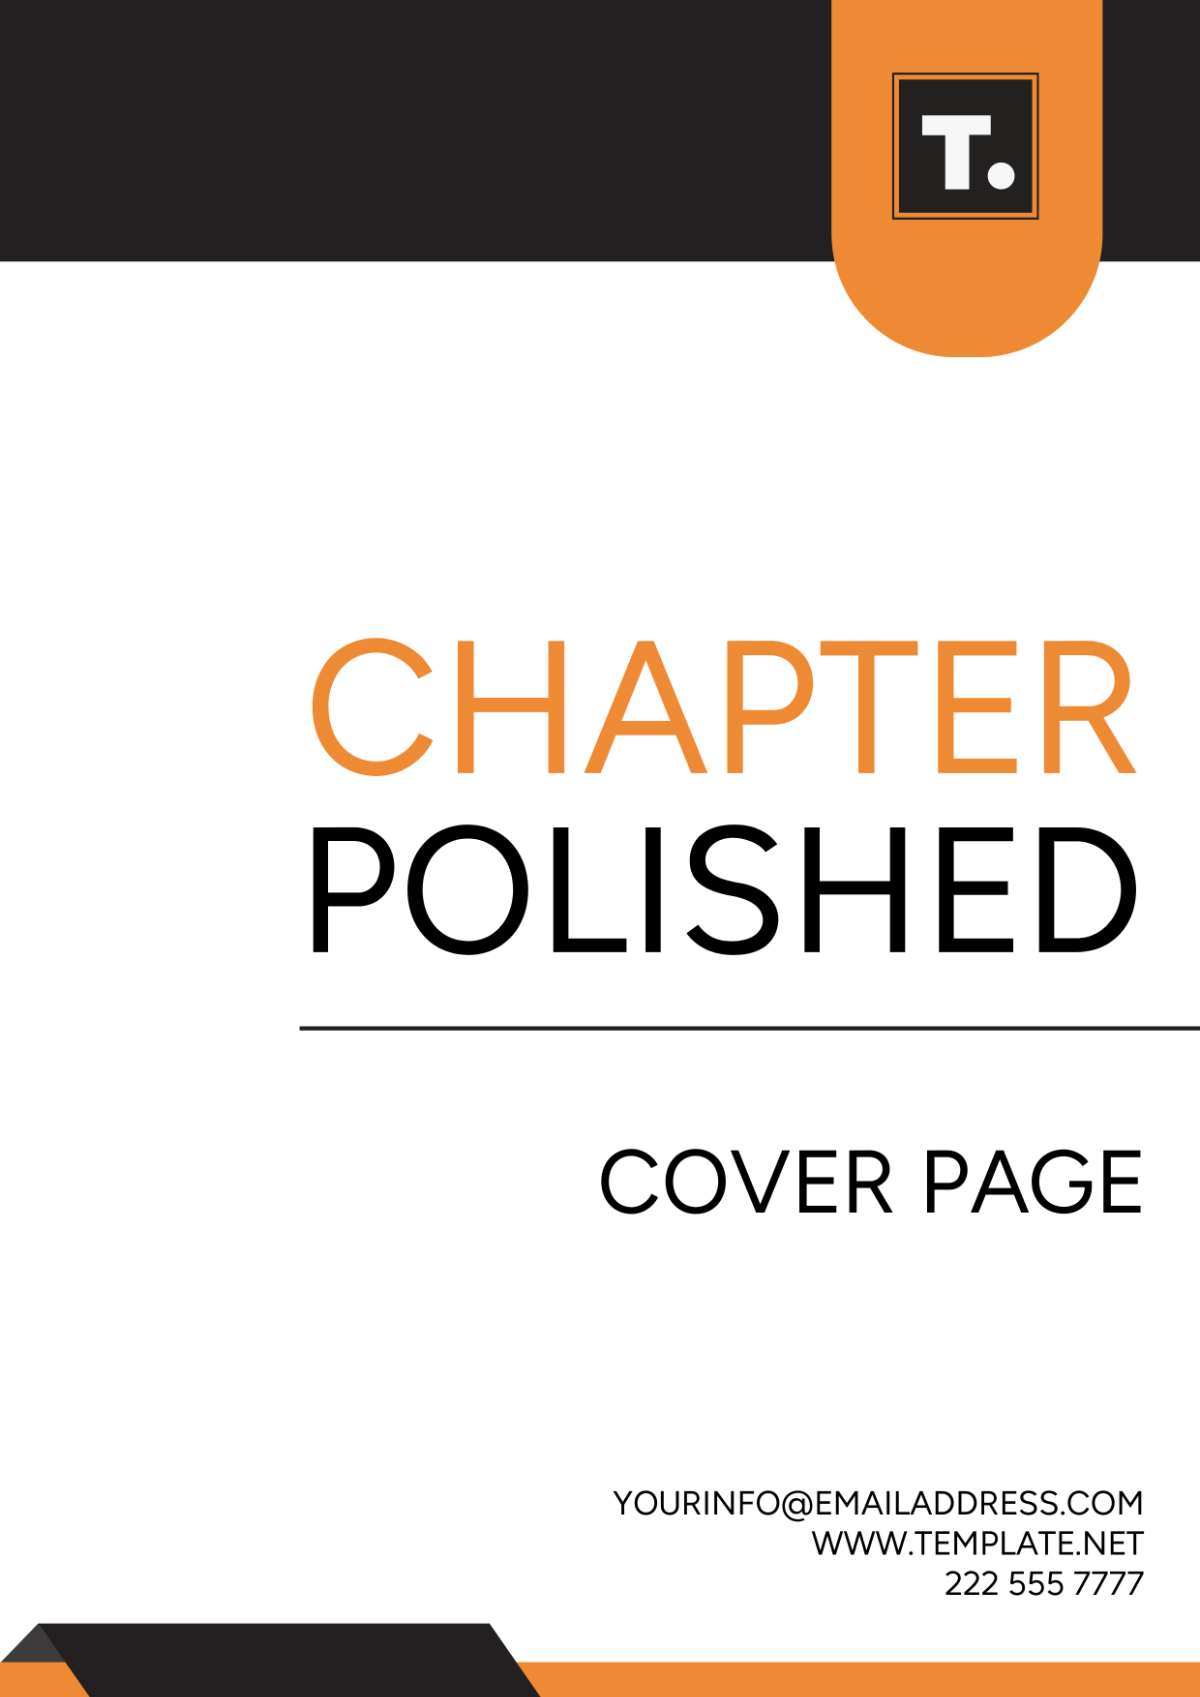 Chapter Polished Cover Page Template